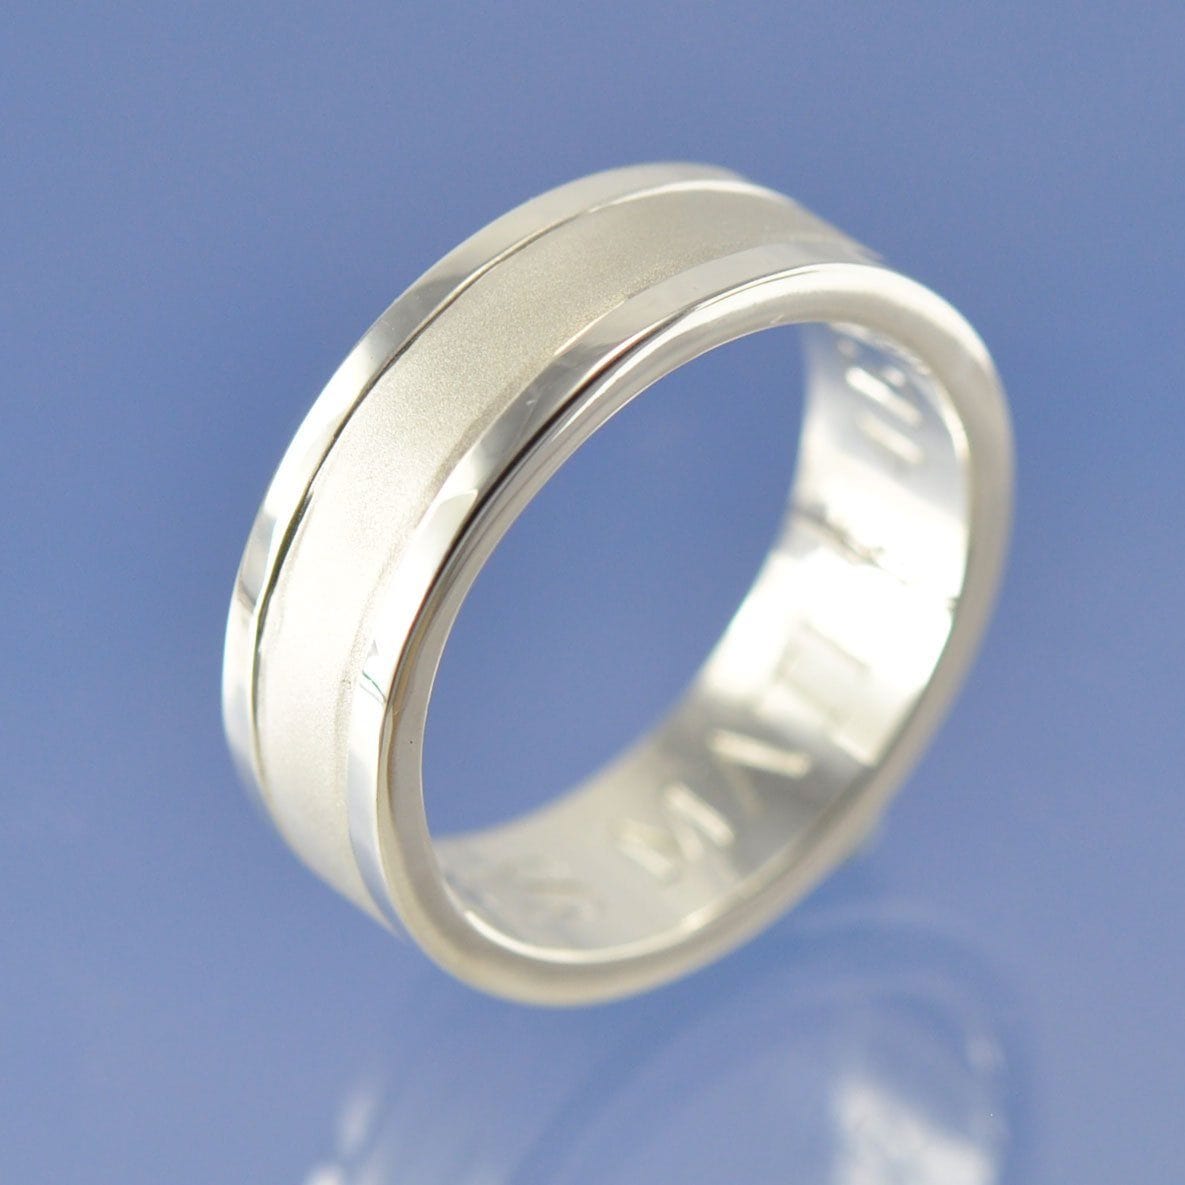 Cremation Ashes Ring -Tri-Maci Design Ring by Chris Parry Jewellery